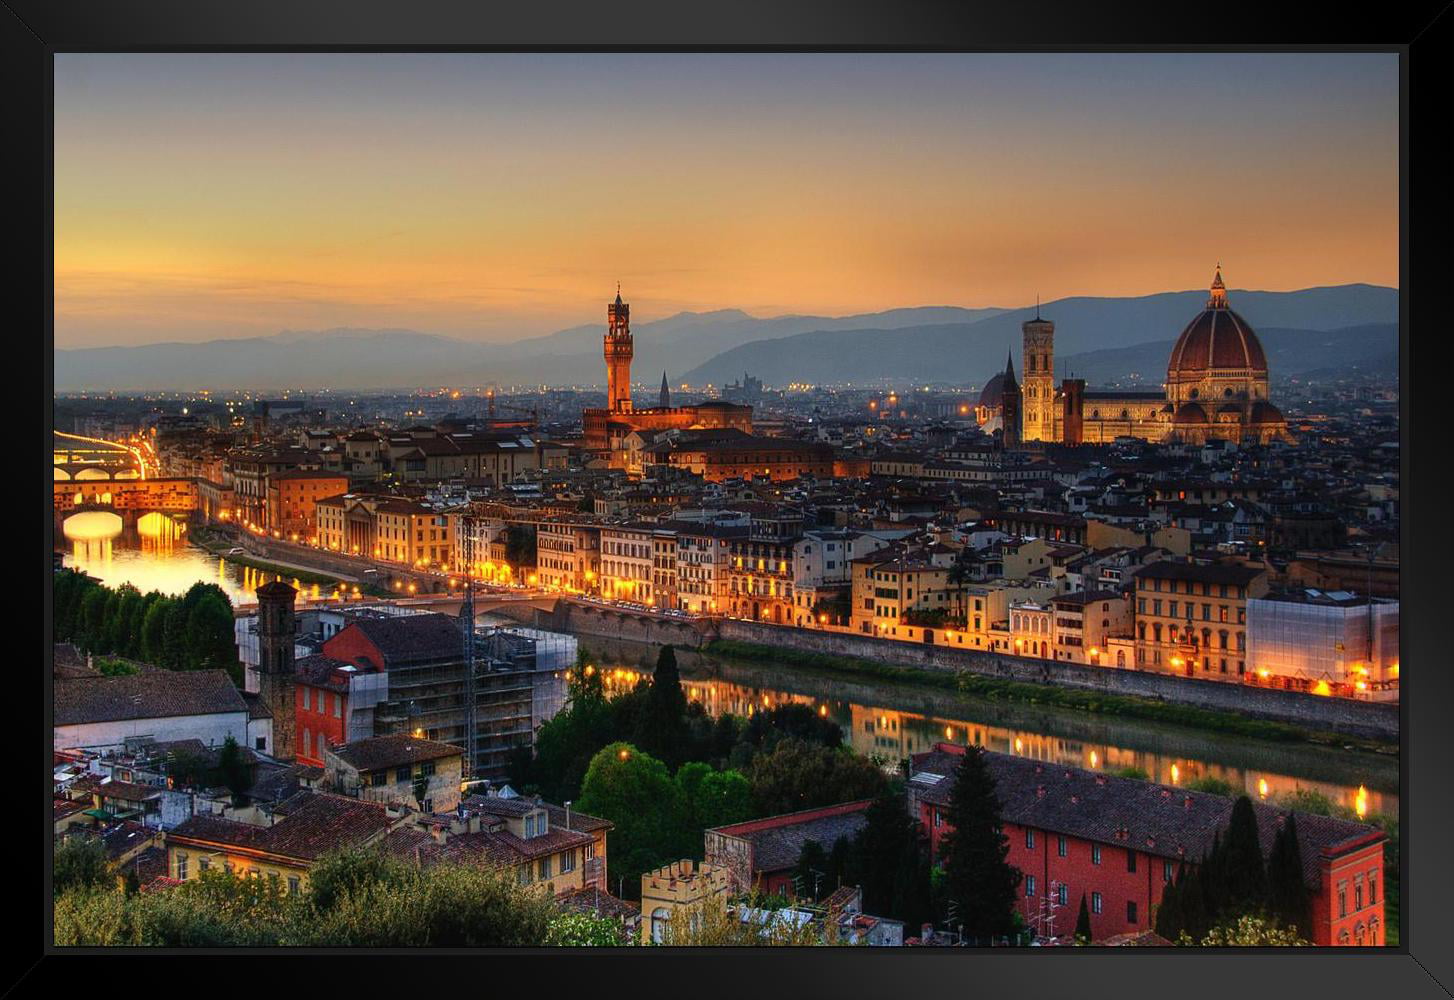 FLORENCE ITALY CATHEDRAL POSTER SUNSET MOUNTAINS HILLS WALL ART LARGE IMAGE 